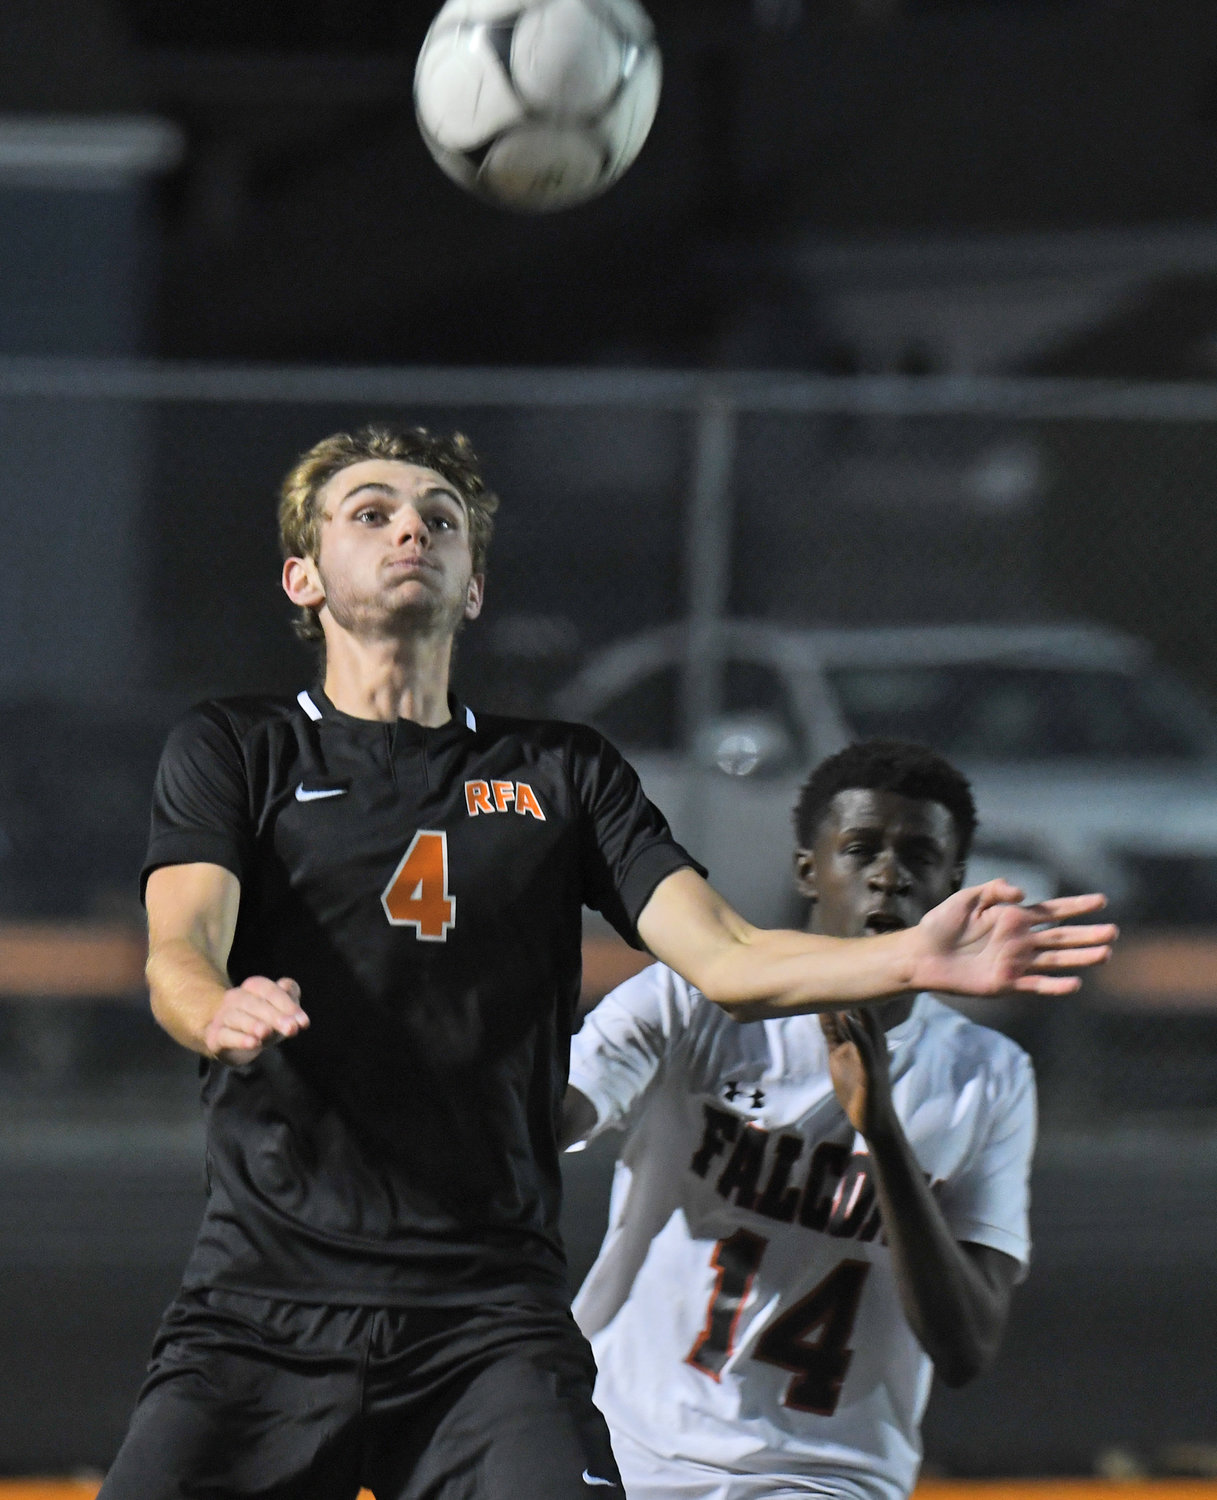 Gavin Civitelli of Rome Free Academy, left, looks to control the ball with Fowler's Simon Irankunda behind him Wednesday night at RFA Stadium. RFA won 1-0 on a late goal to advance to the quarterfinals of the Section III Class AA playoffs.